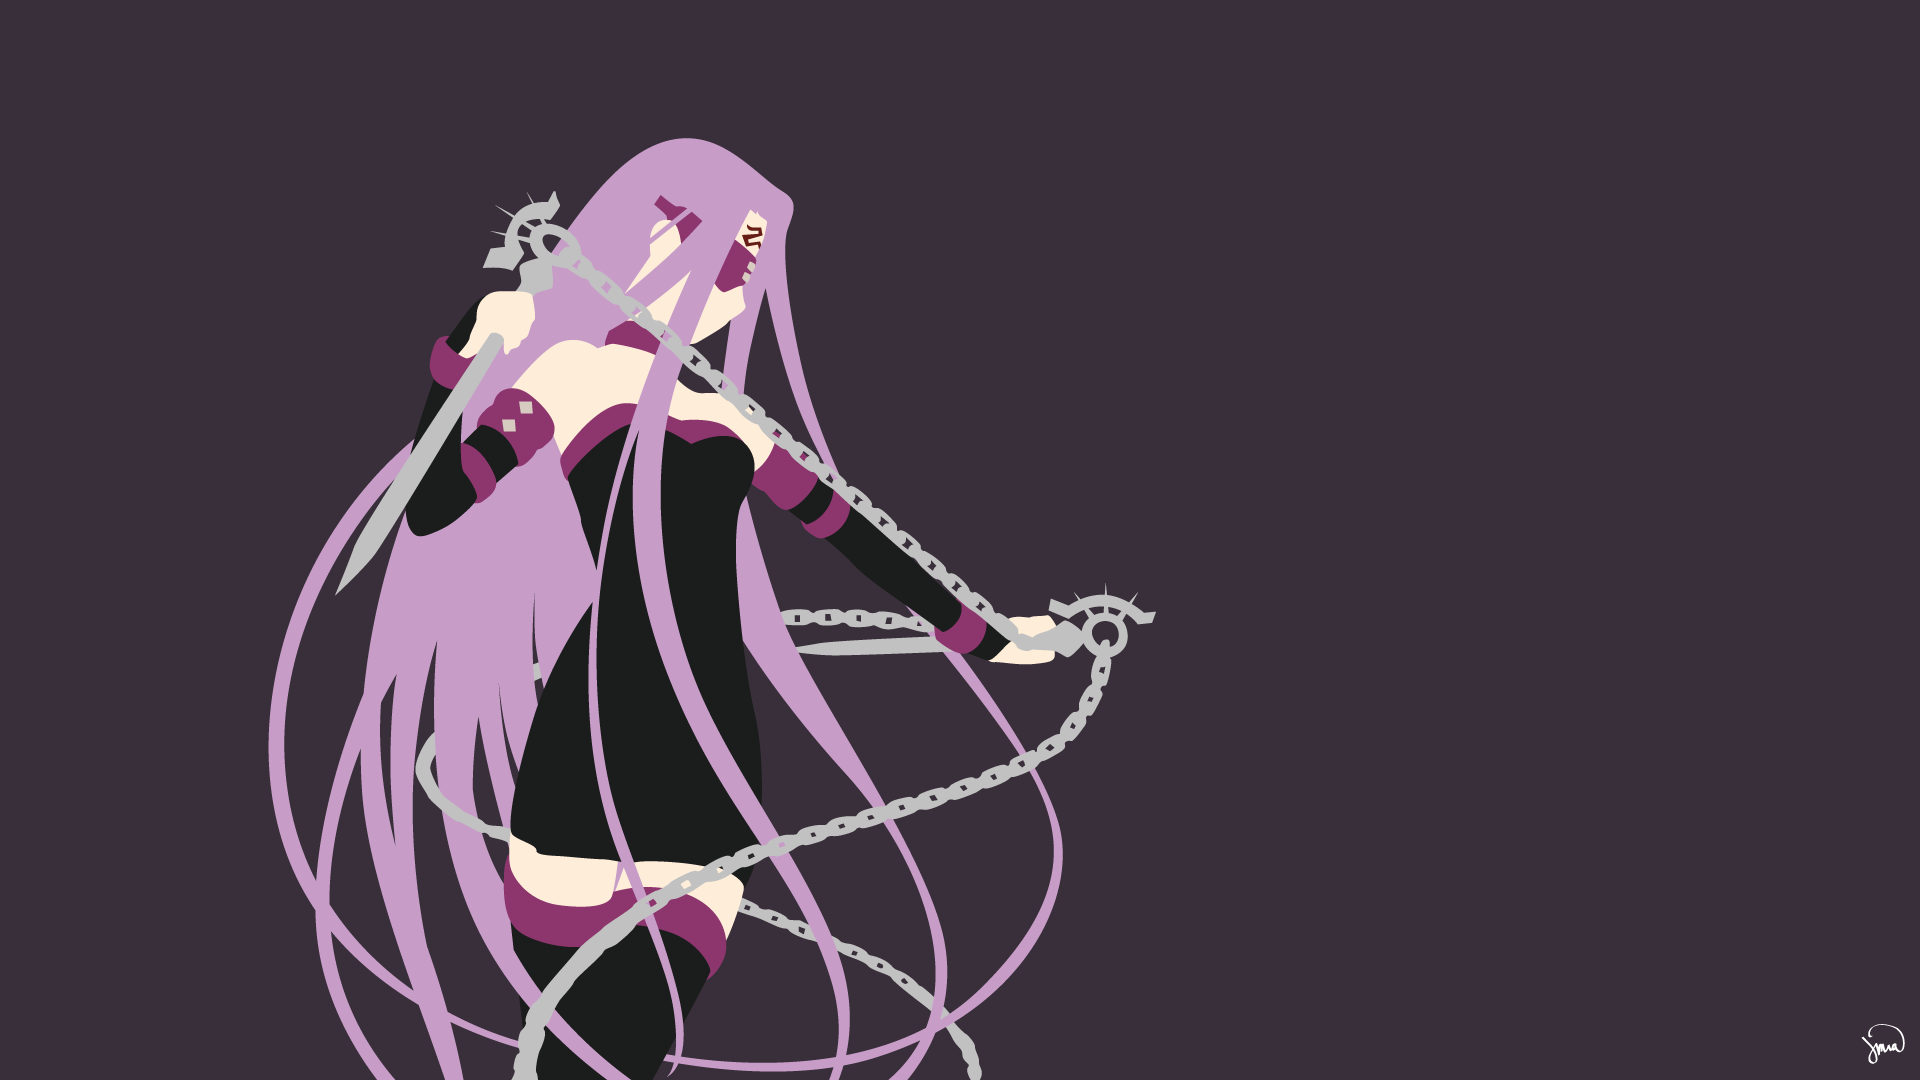 Anime 1920x1080 minimalism Rider (Fate/Stay Night) Fate series Fate/Stay Night anime girls Fate/Stay Night: Unlimited Blade Works anime chains girls with guns DeviantArt purple hair long hair